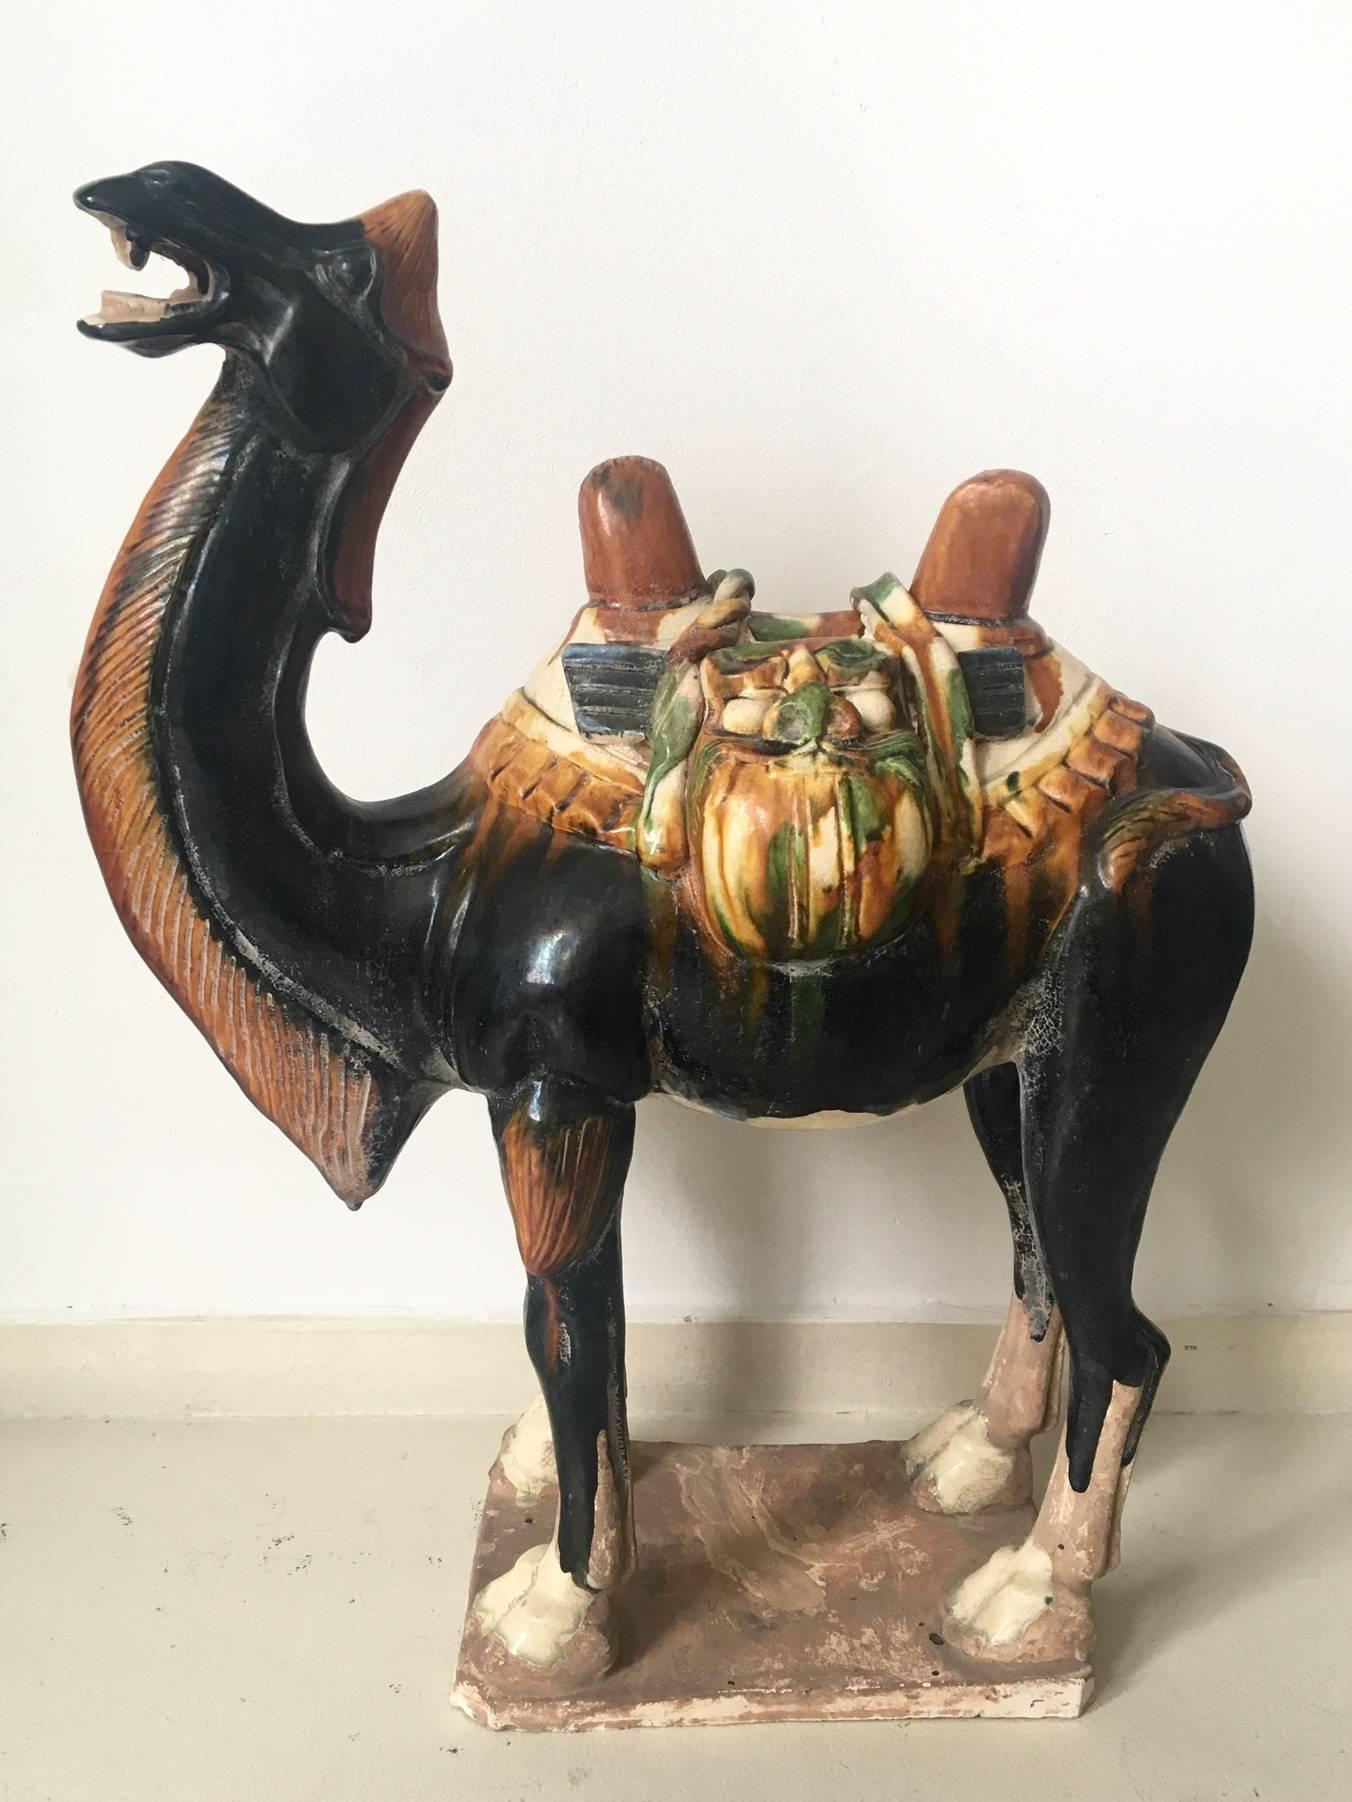 This absolute stunning positioned camel was manufactured in China, circa 1960s and finished with a Sancai glaze. It's saddlebags show a man's face. Free shipping to Continental Europe and Continental US!

